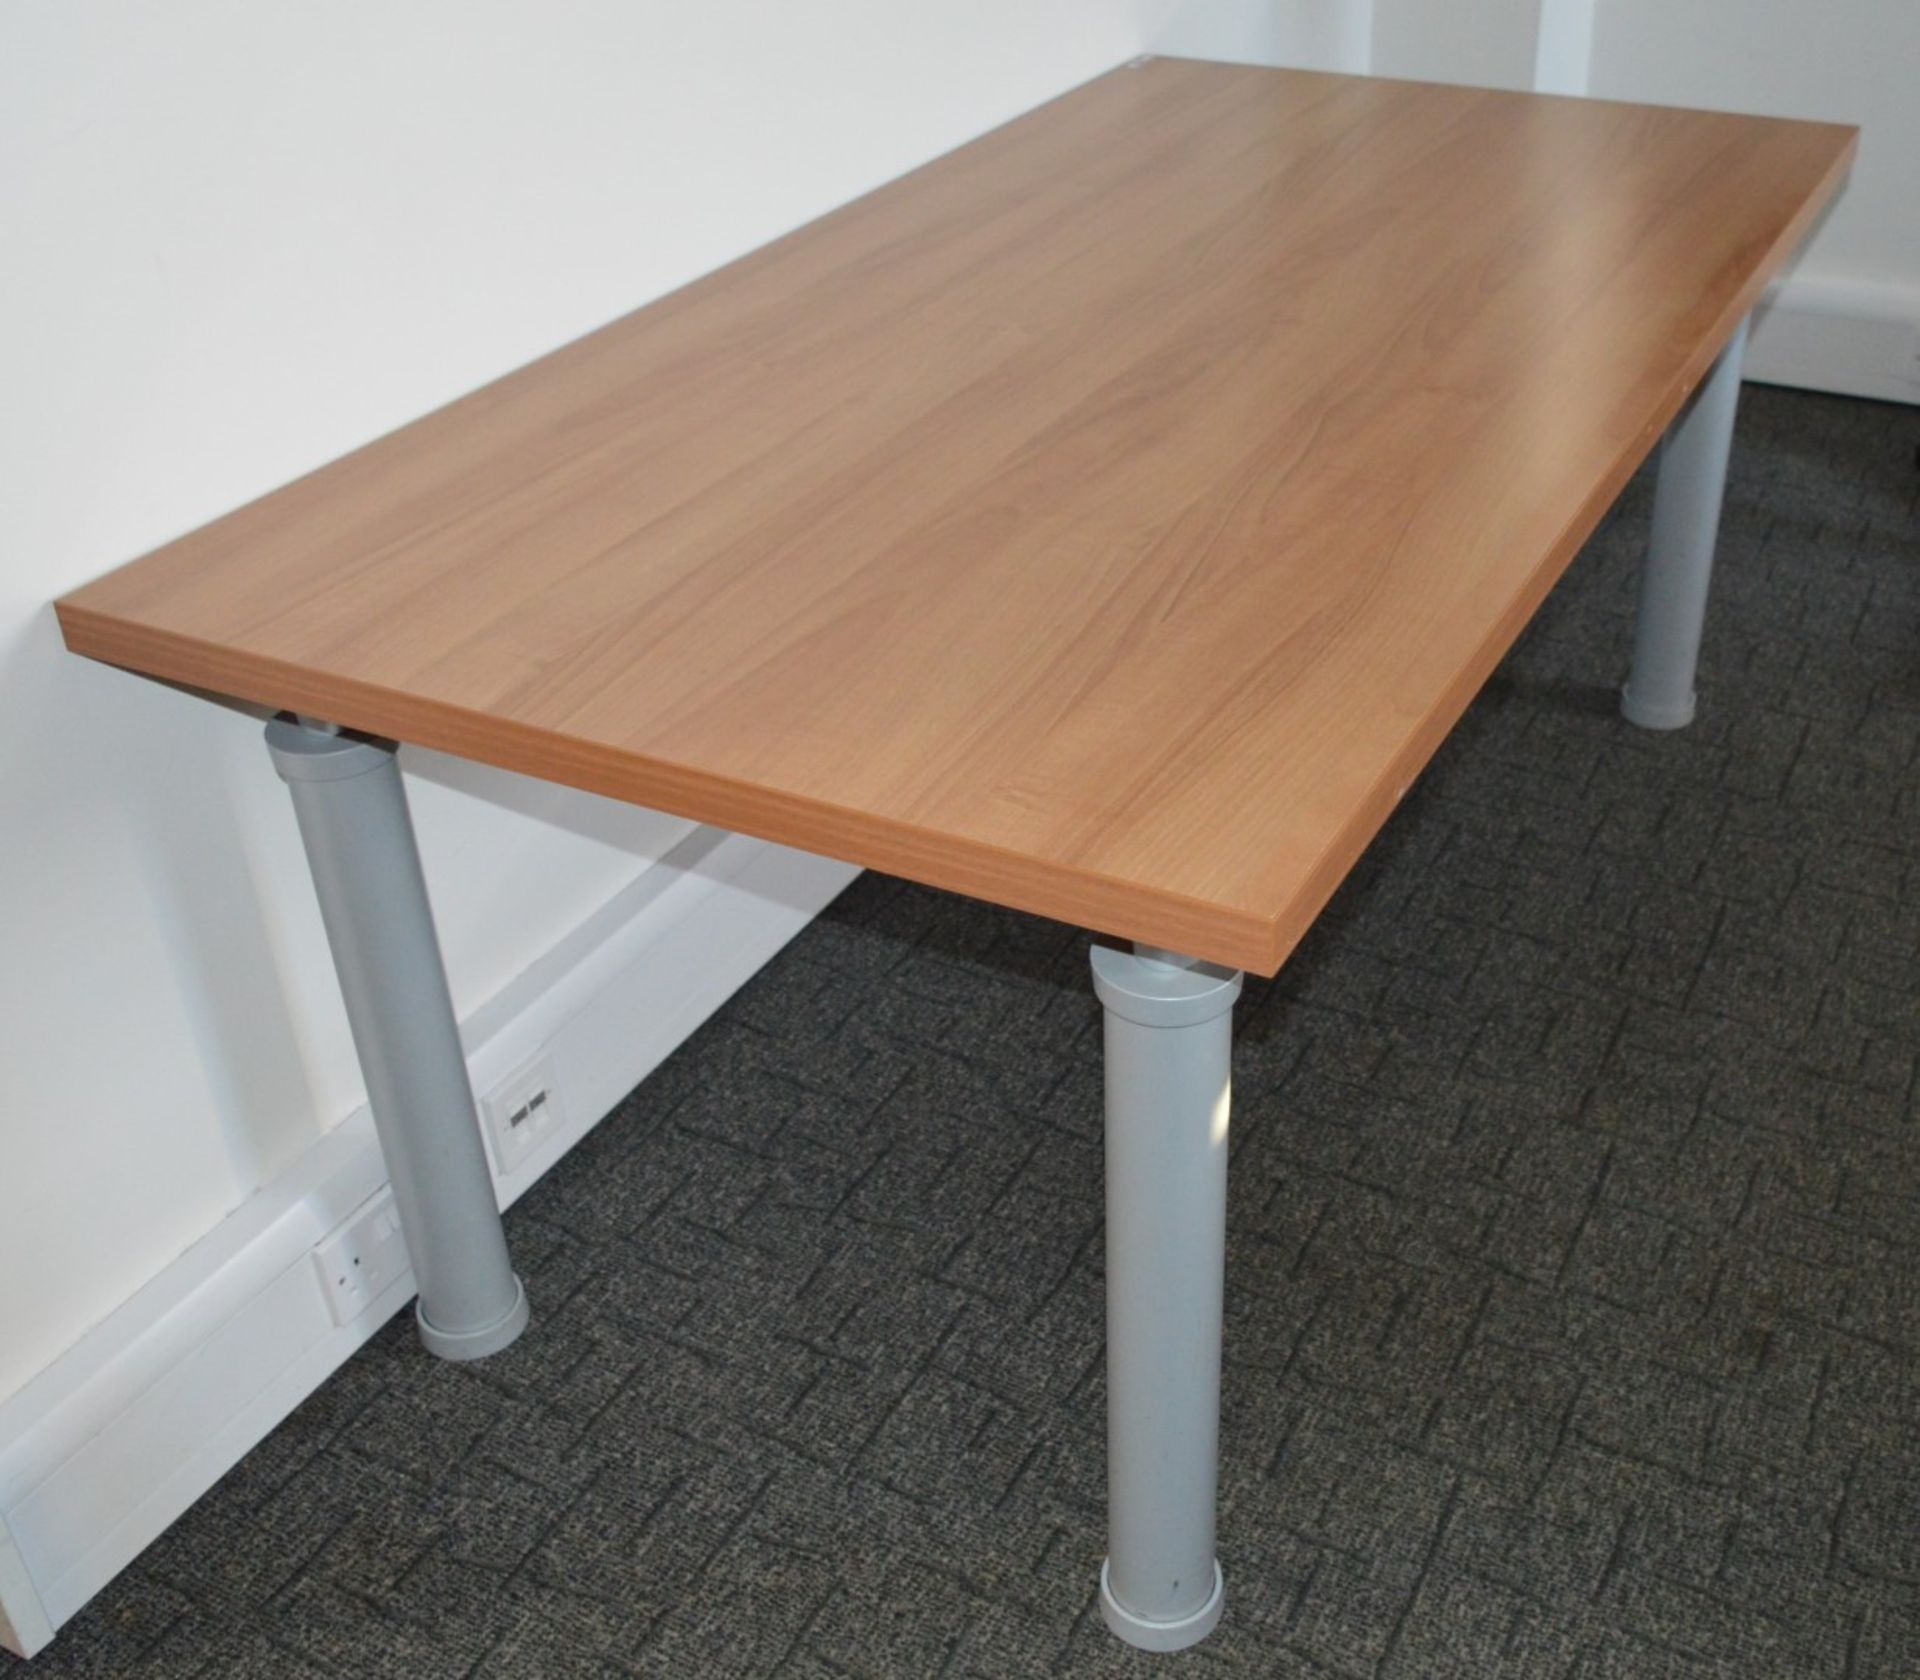 1 x Conference Office Table - Beech Finish - High Quality Office Furniture - H73.5 x W175 x D90 - Image 11 of 13